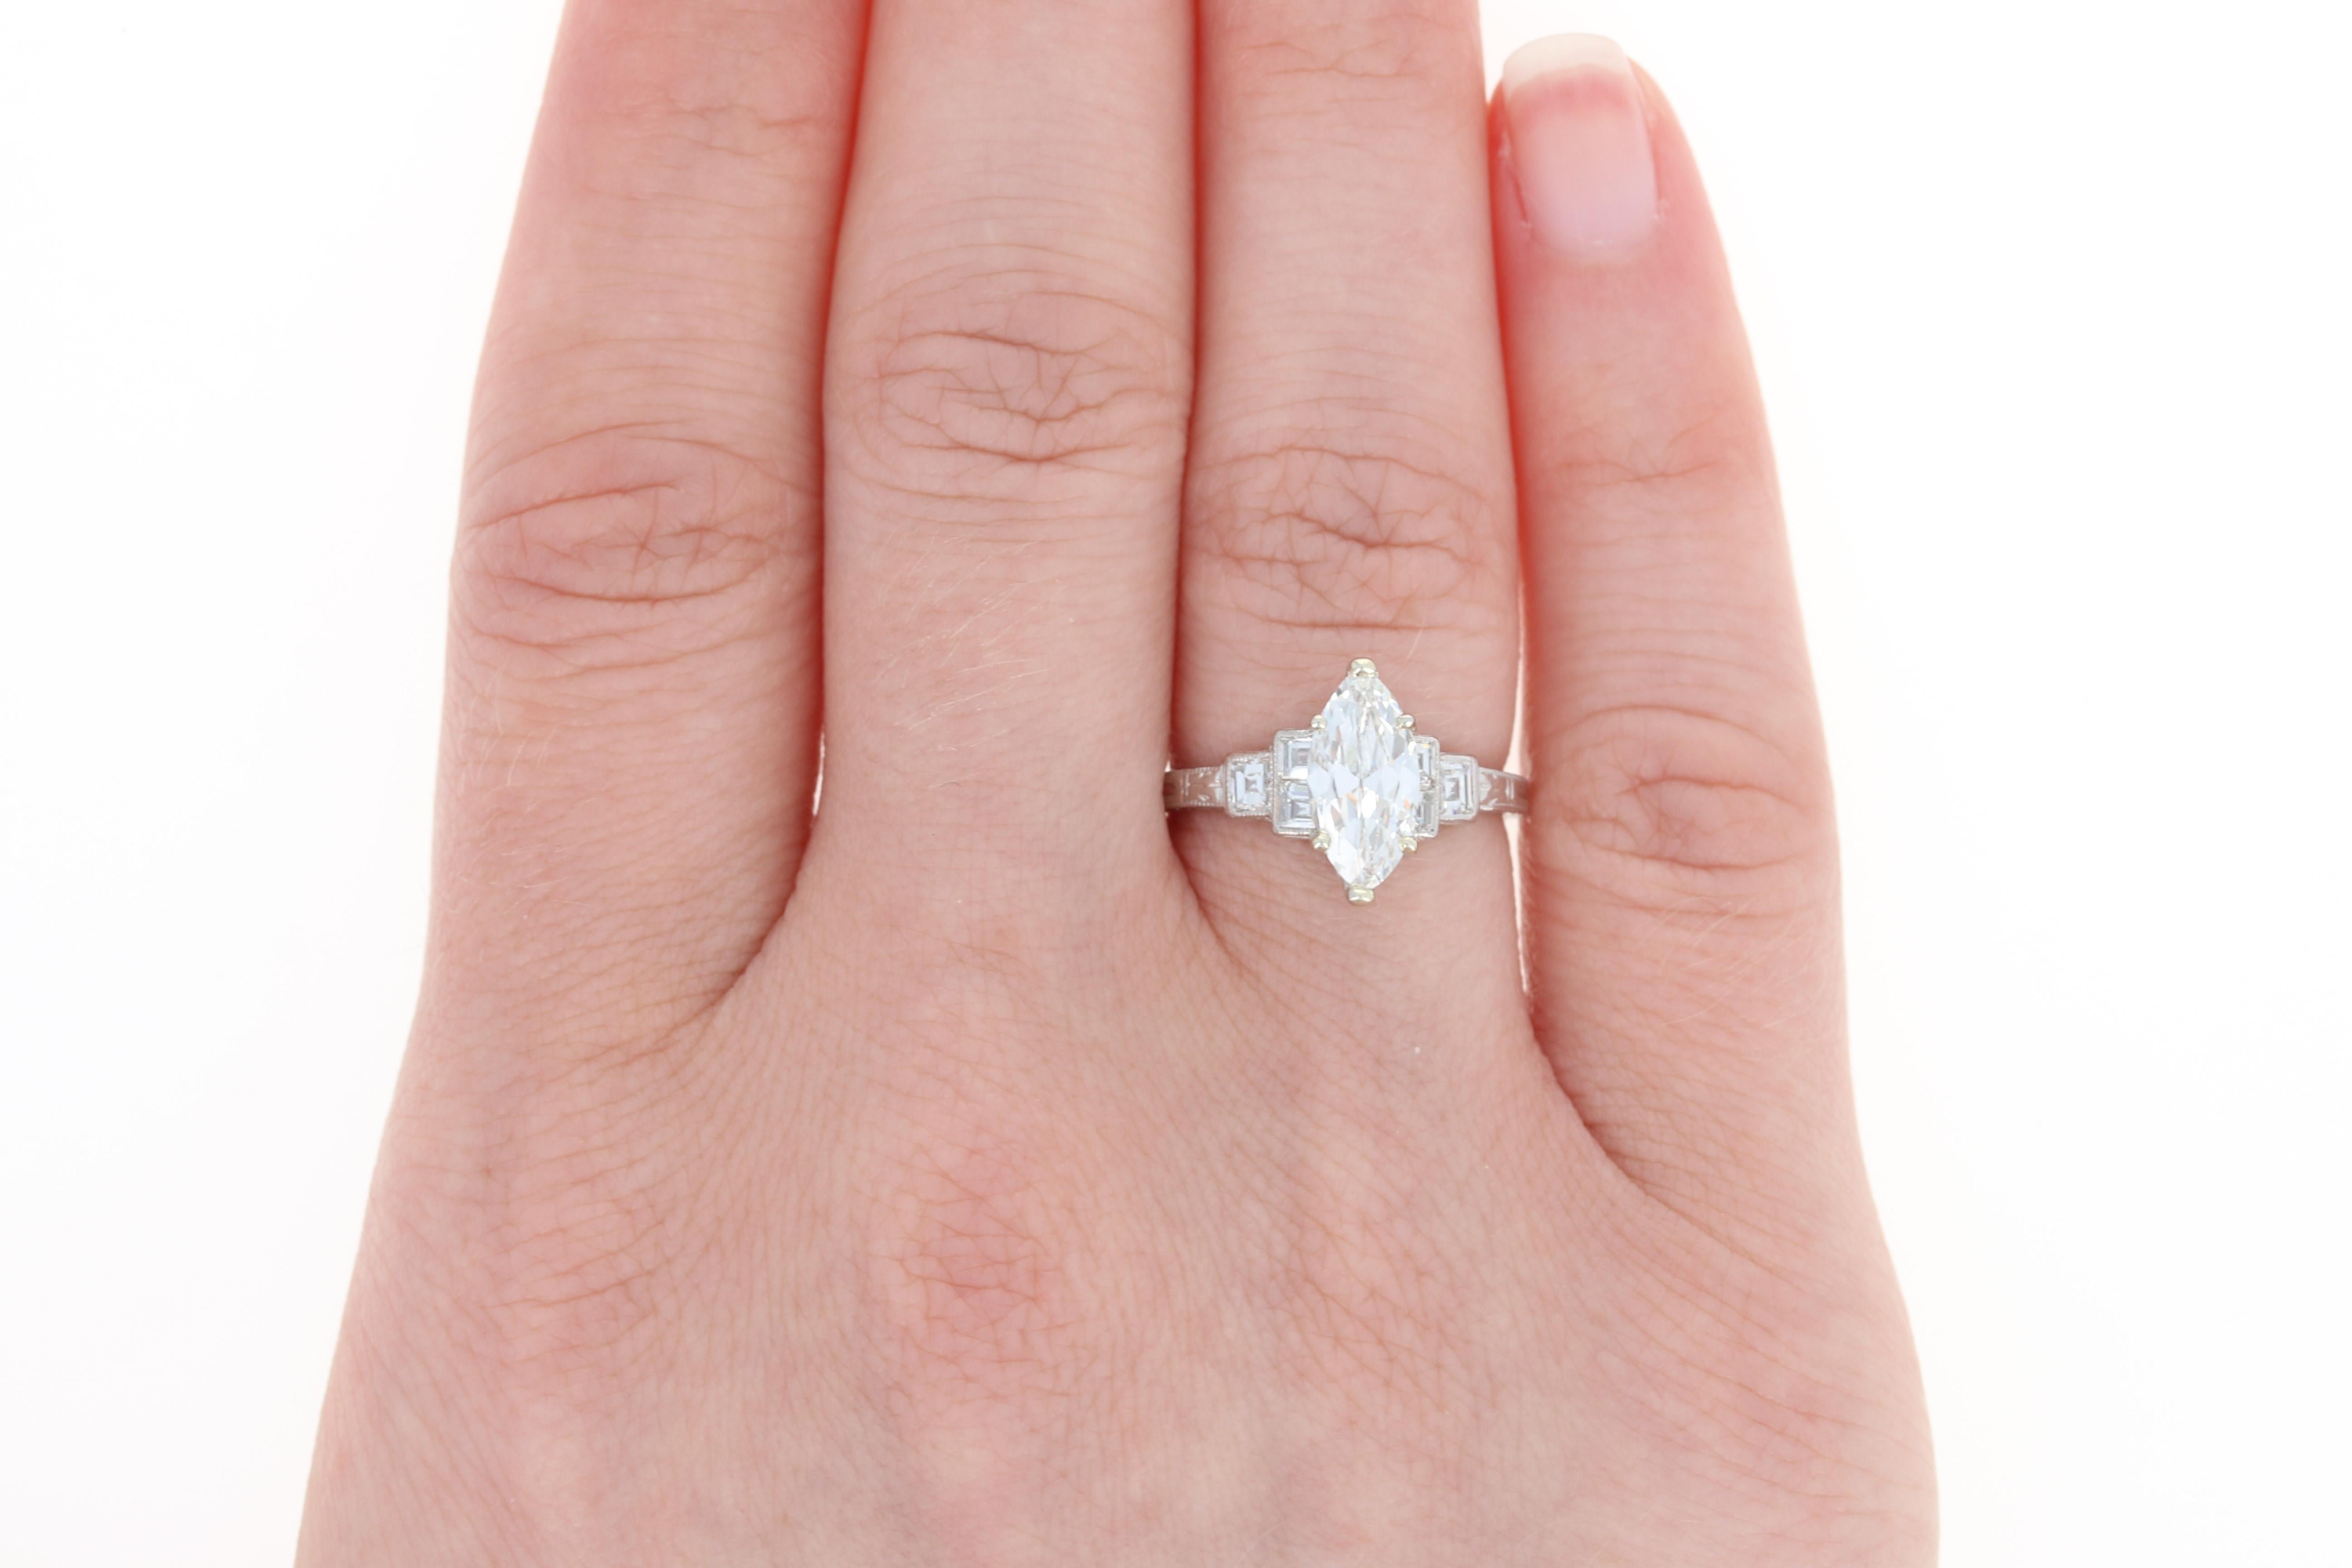 A visual symphony of ethereal beauty is captured in this breathtaking Art Deco creation. Exquisitely crafted in the 1920s - 1930s, this vintage ring showcases a GIA-graded diamond solitaire accompanied by six accent diamonds which are held in a